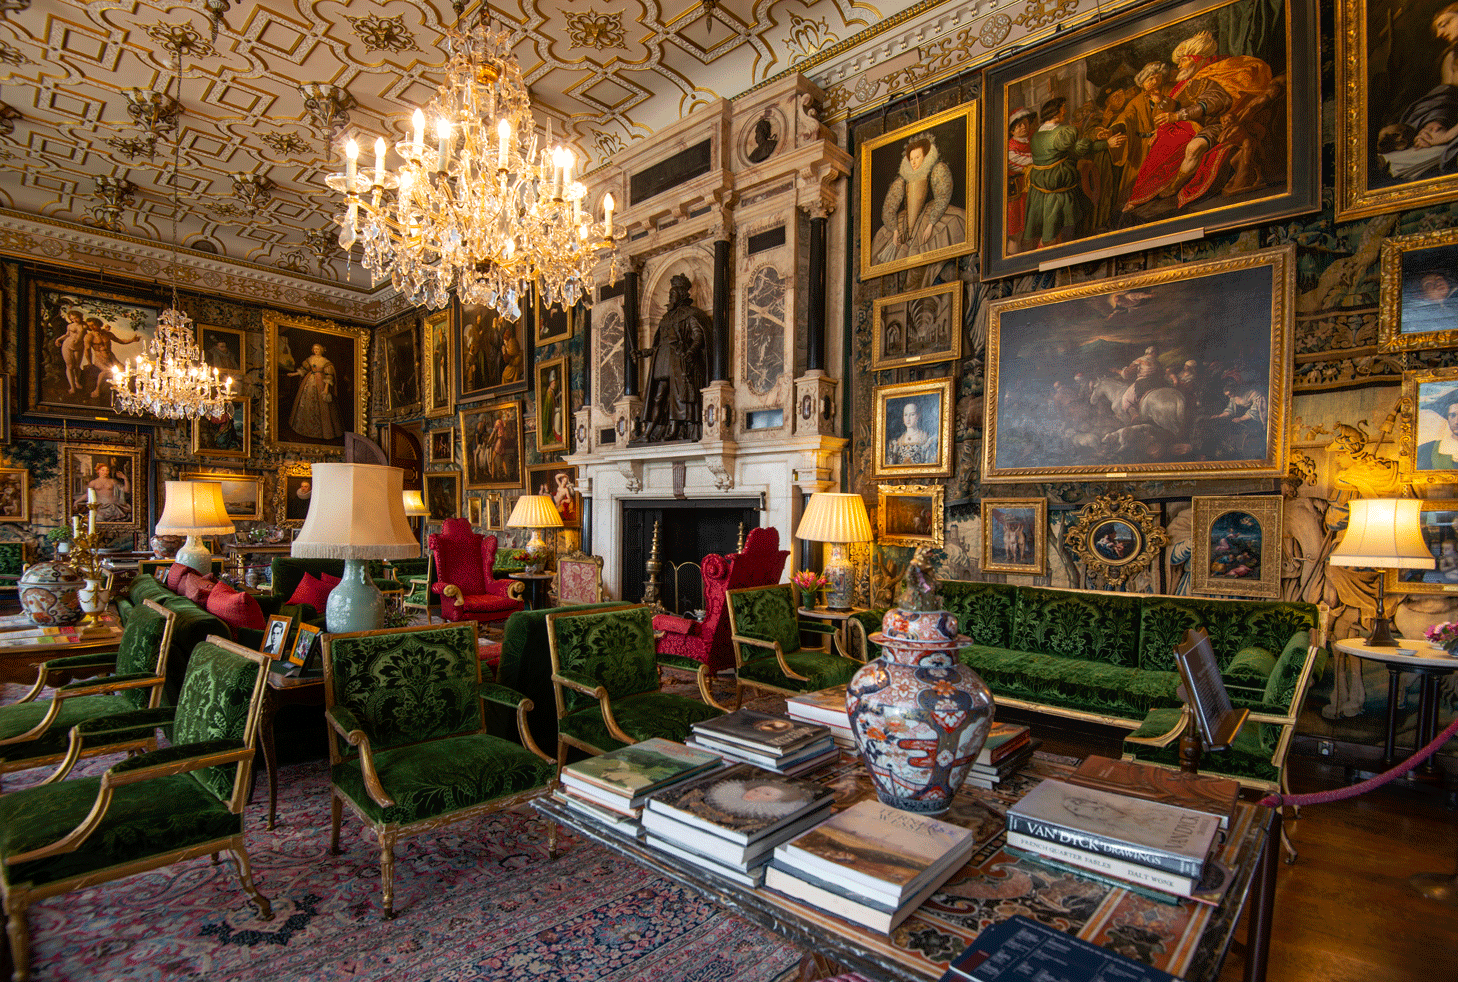 The King James drawing room at Hatfield House